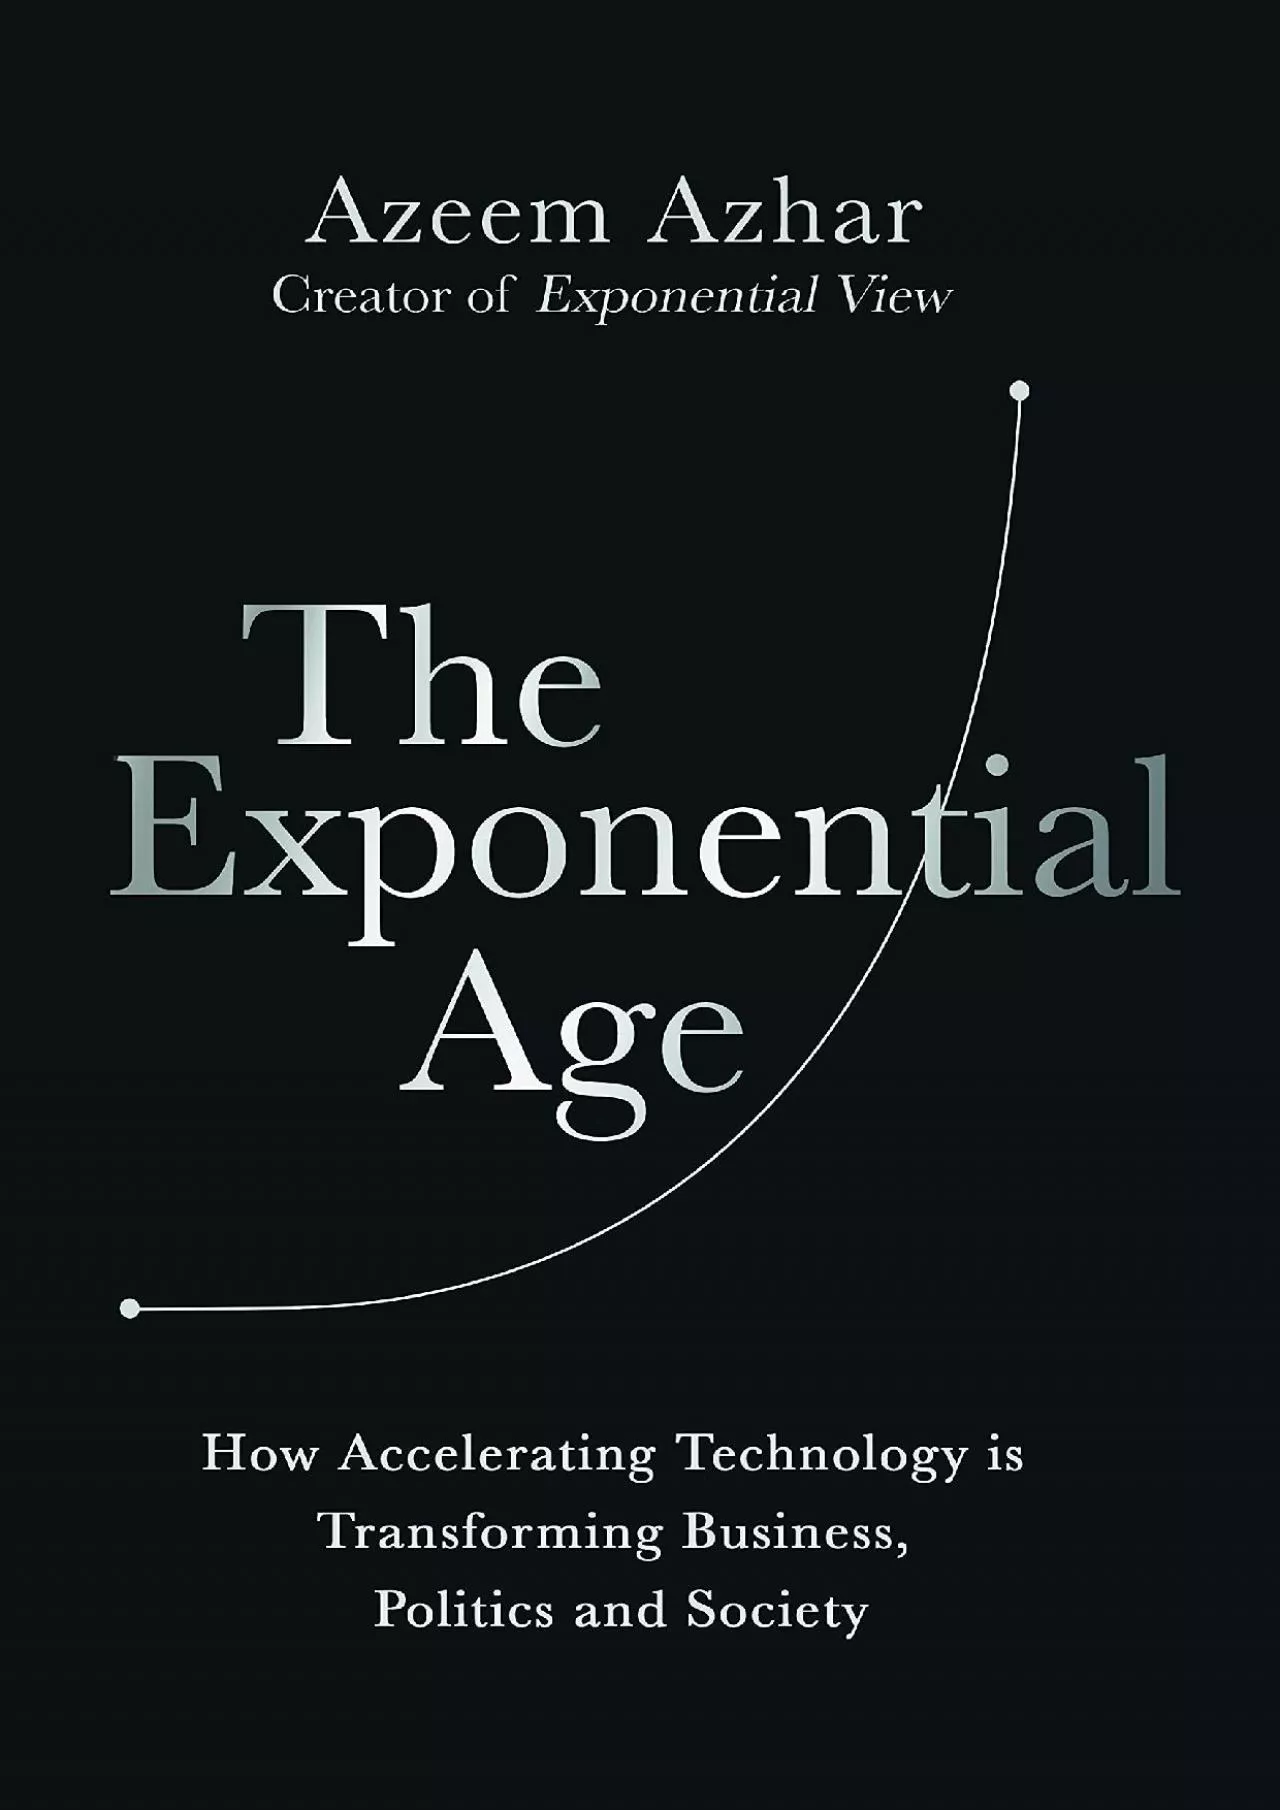 The Exponential Age: How Accelerating Technology is Transforming Business, Politics and